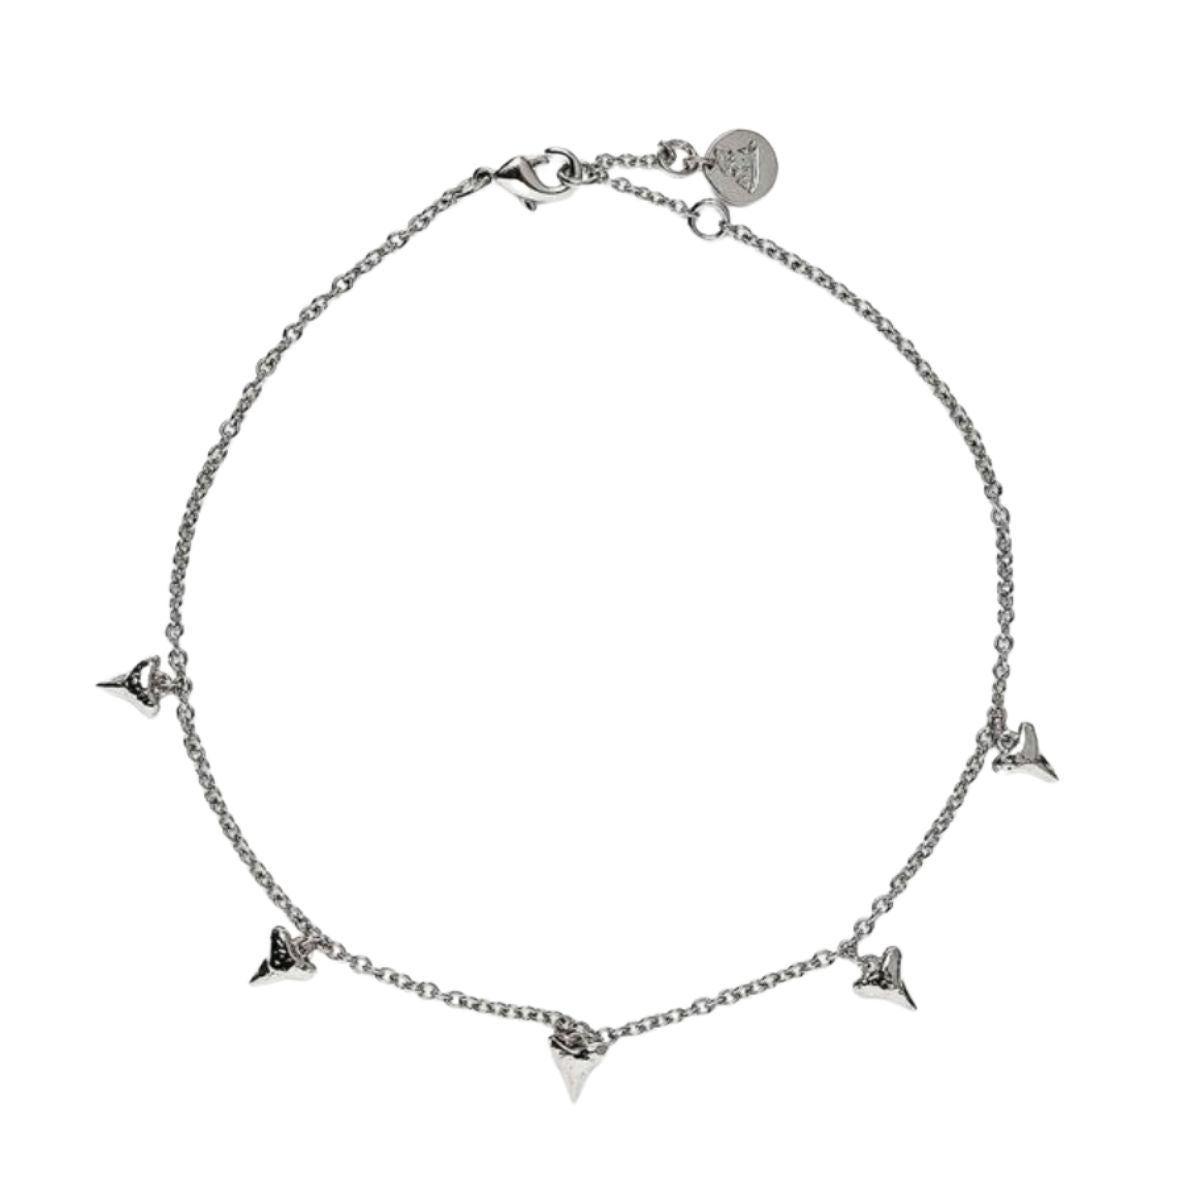 Pura Vida Shark Tooth Chain Anklet in Silver - BoardCo